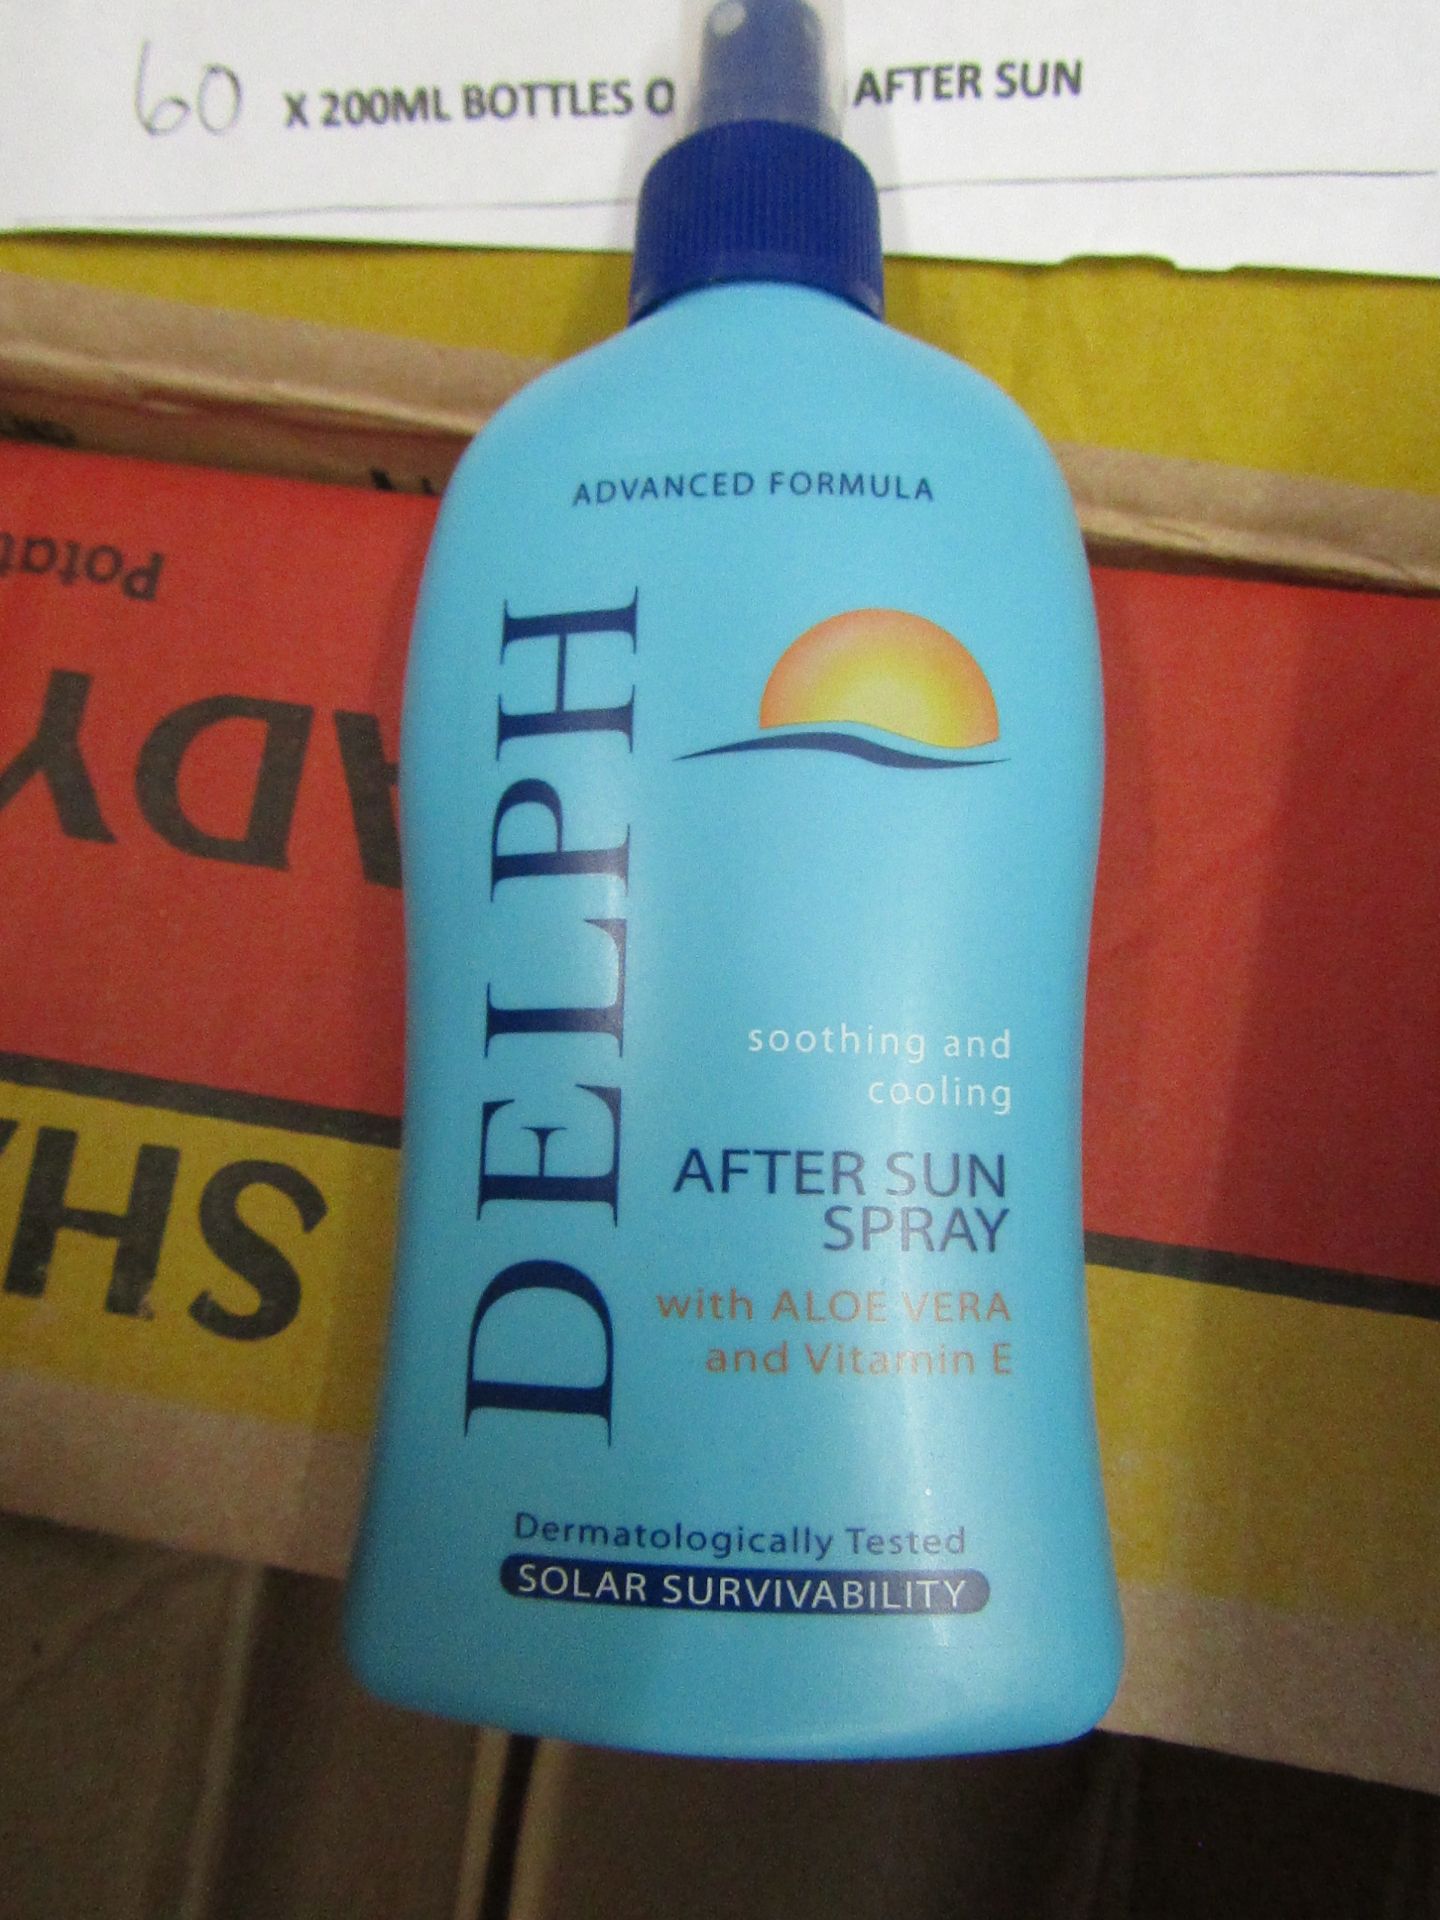 6 x 200ml Delph After sun spray. New & Boxed